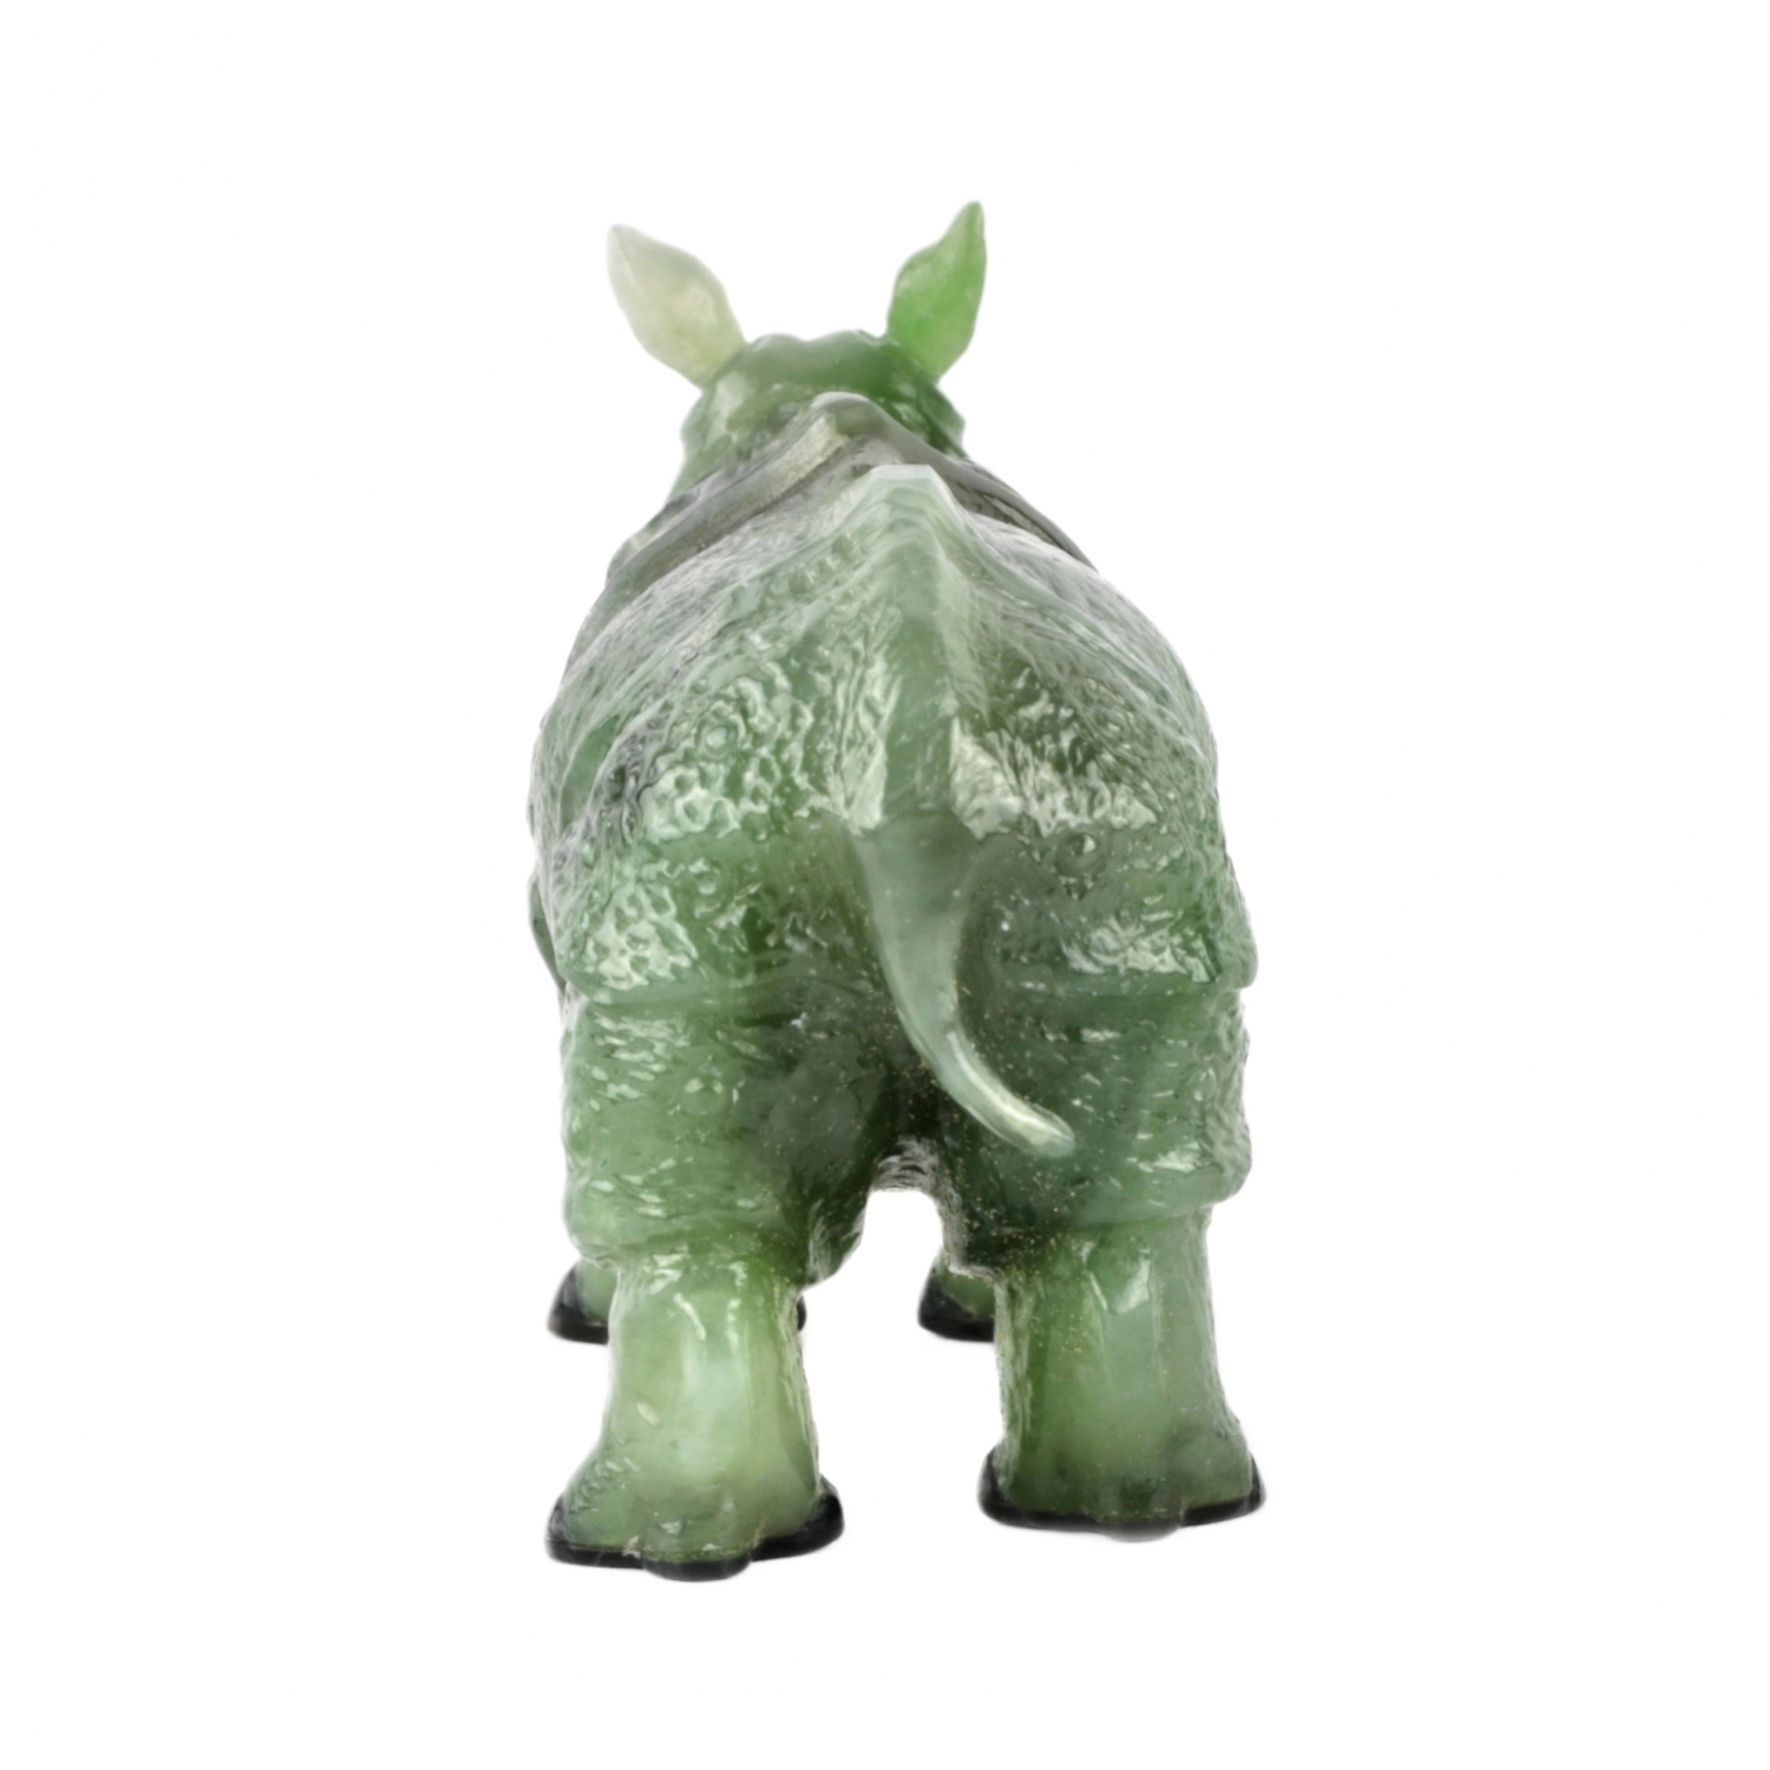 Stone-cutting miniature Jade rhinoceros in the style of products from the Faberge firm - Image 3 of 5